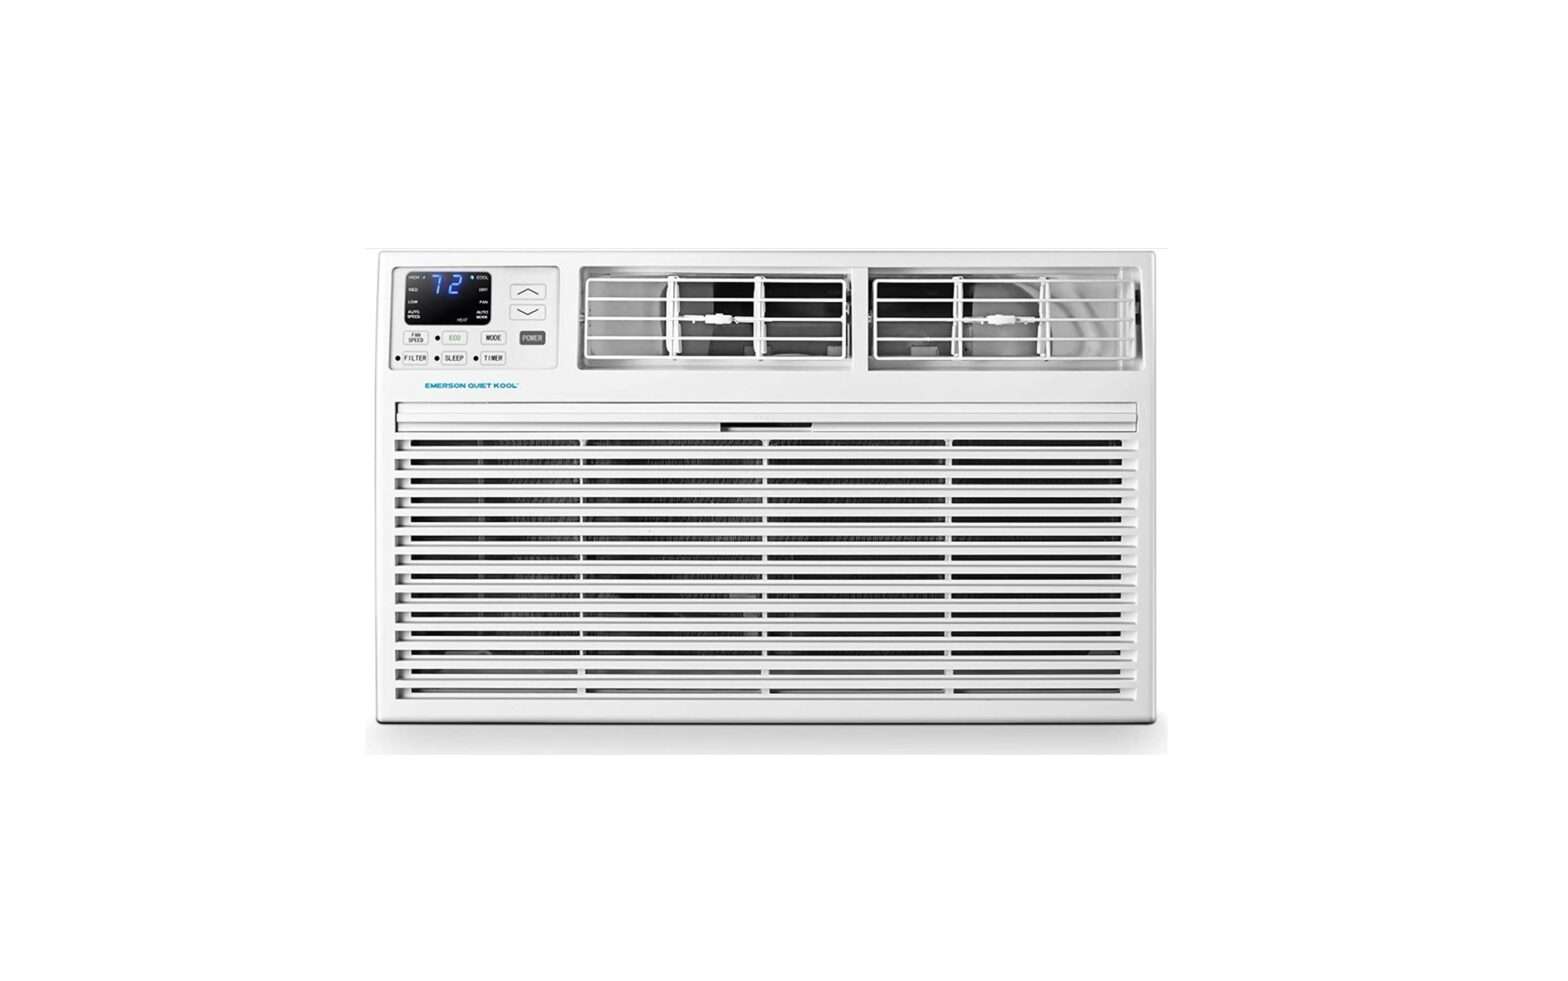 EMERSON 14000 BTU Thru-The-Wall Air Conditioner Owner's Manual - Featured image